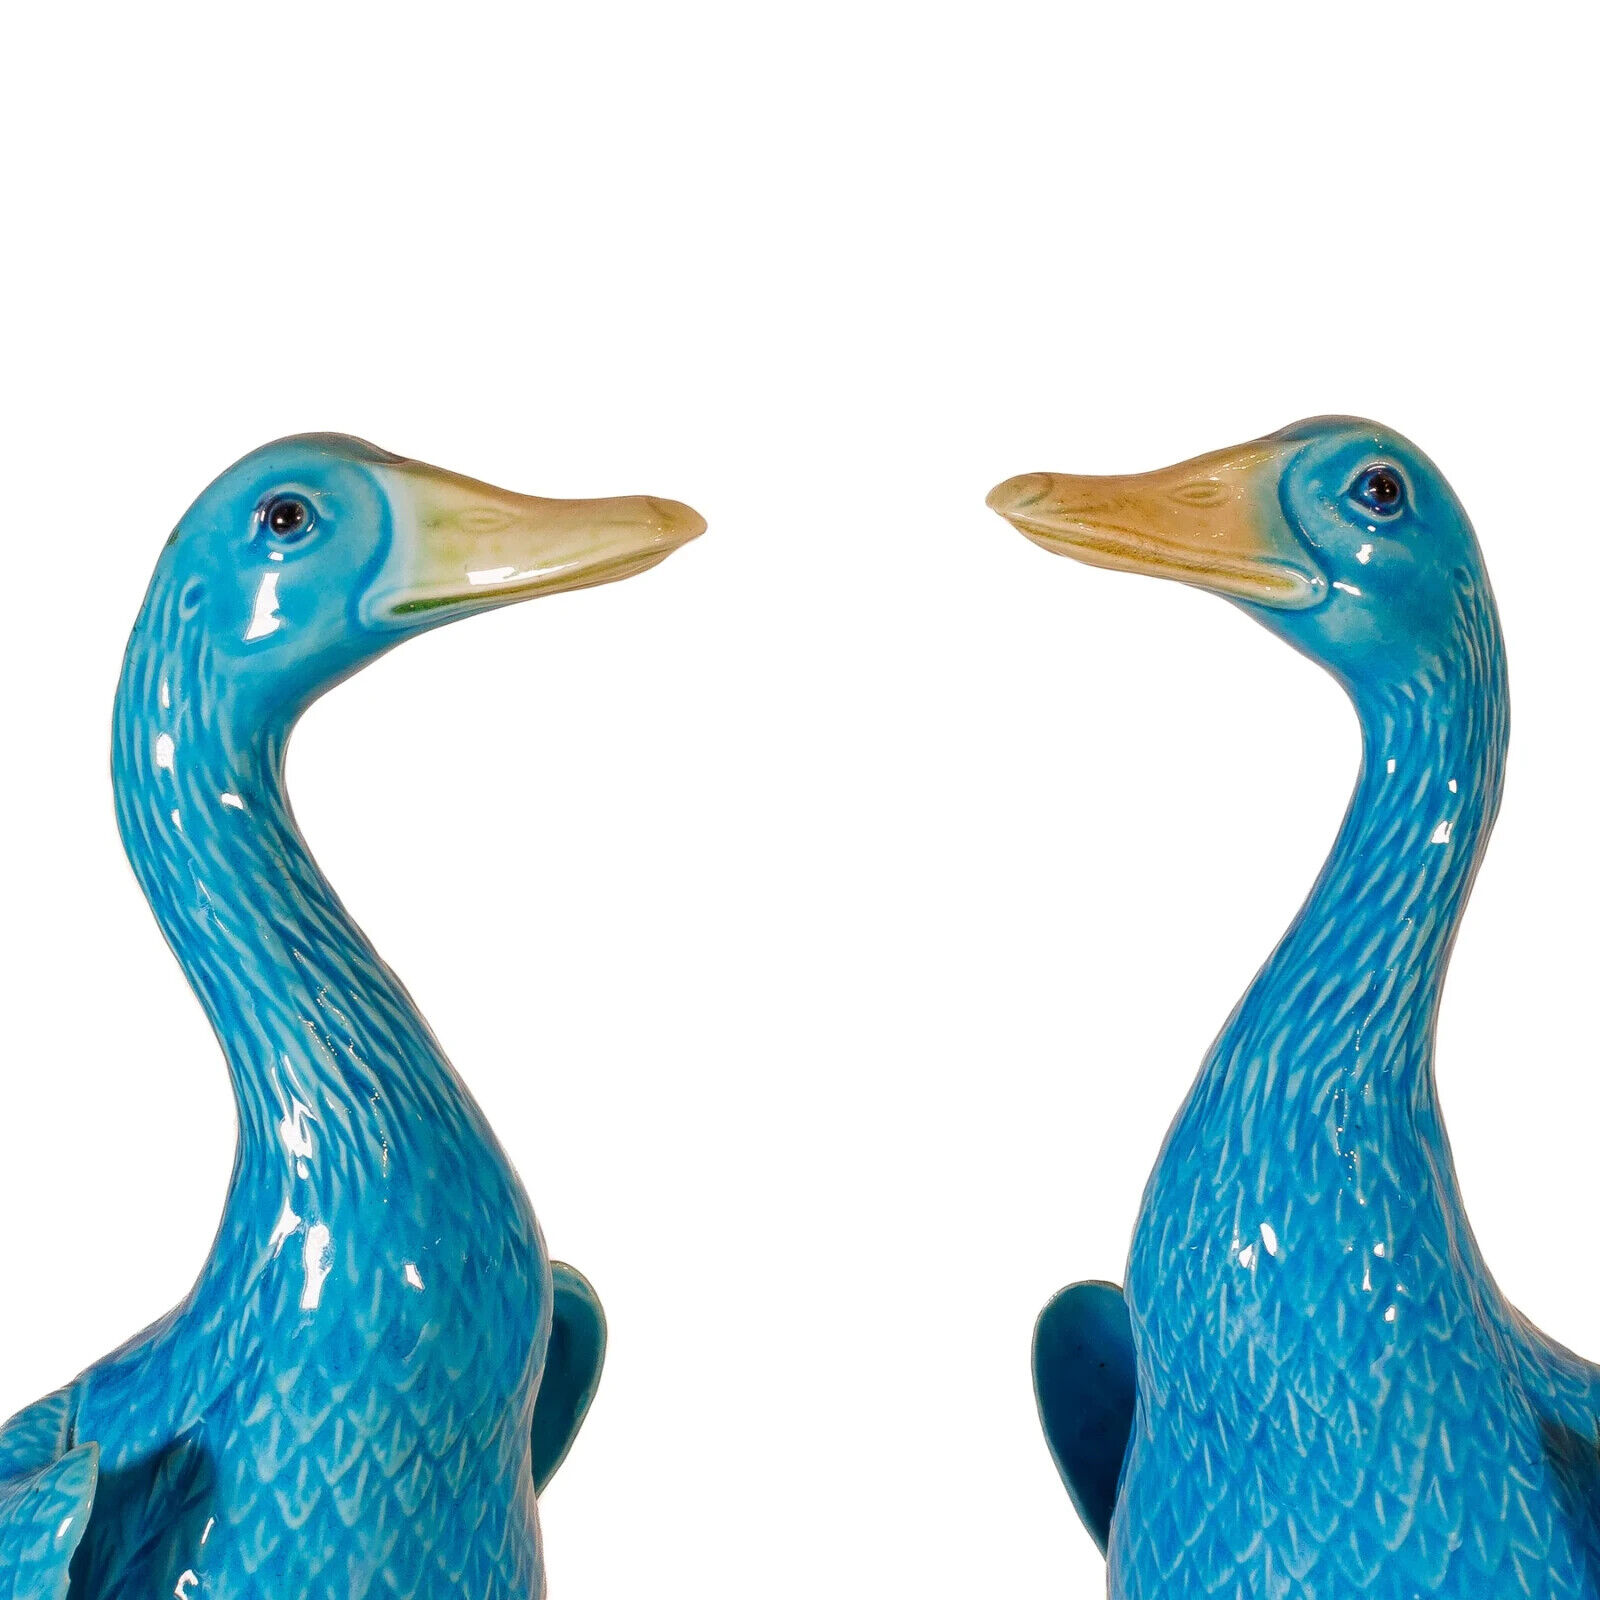 A Pair of 19th Century Export Glazed Chinese Turquoise Porcelain Ducks